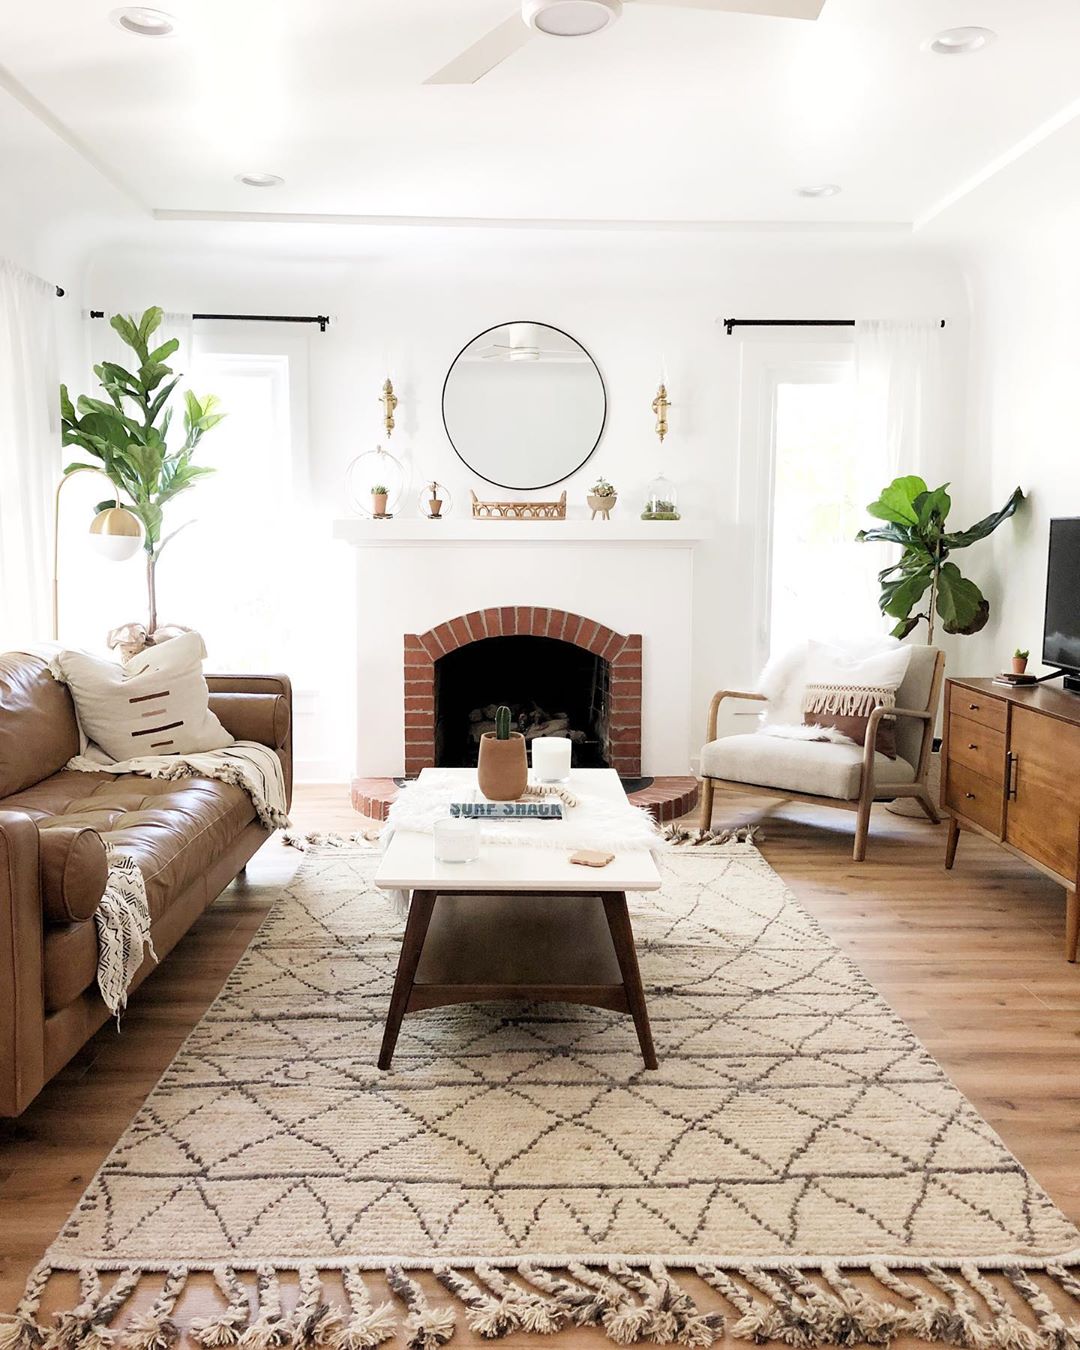 White-painted living room with wood floors and brown leather couch. Photo by Instagram user @cottageandsea